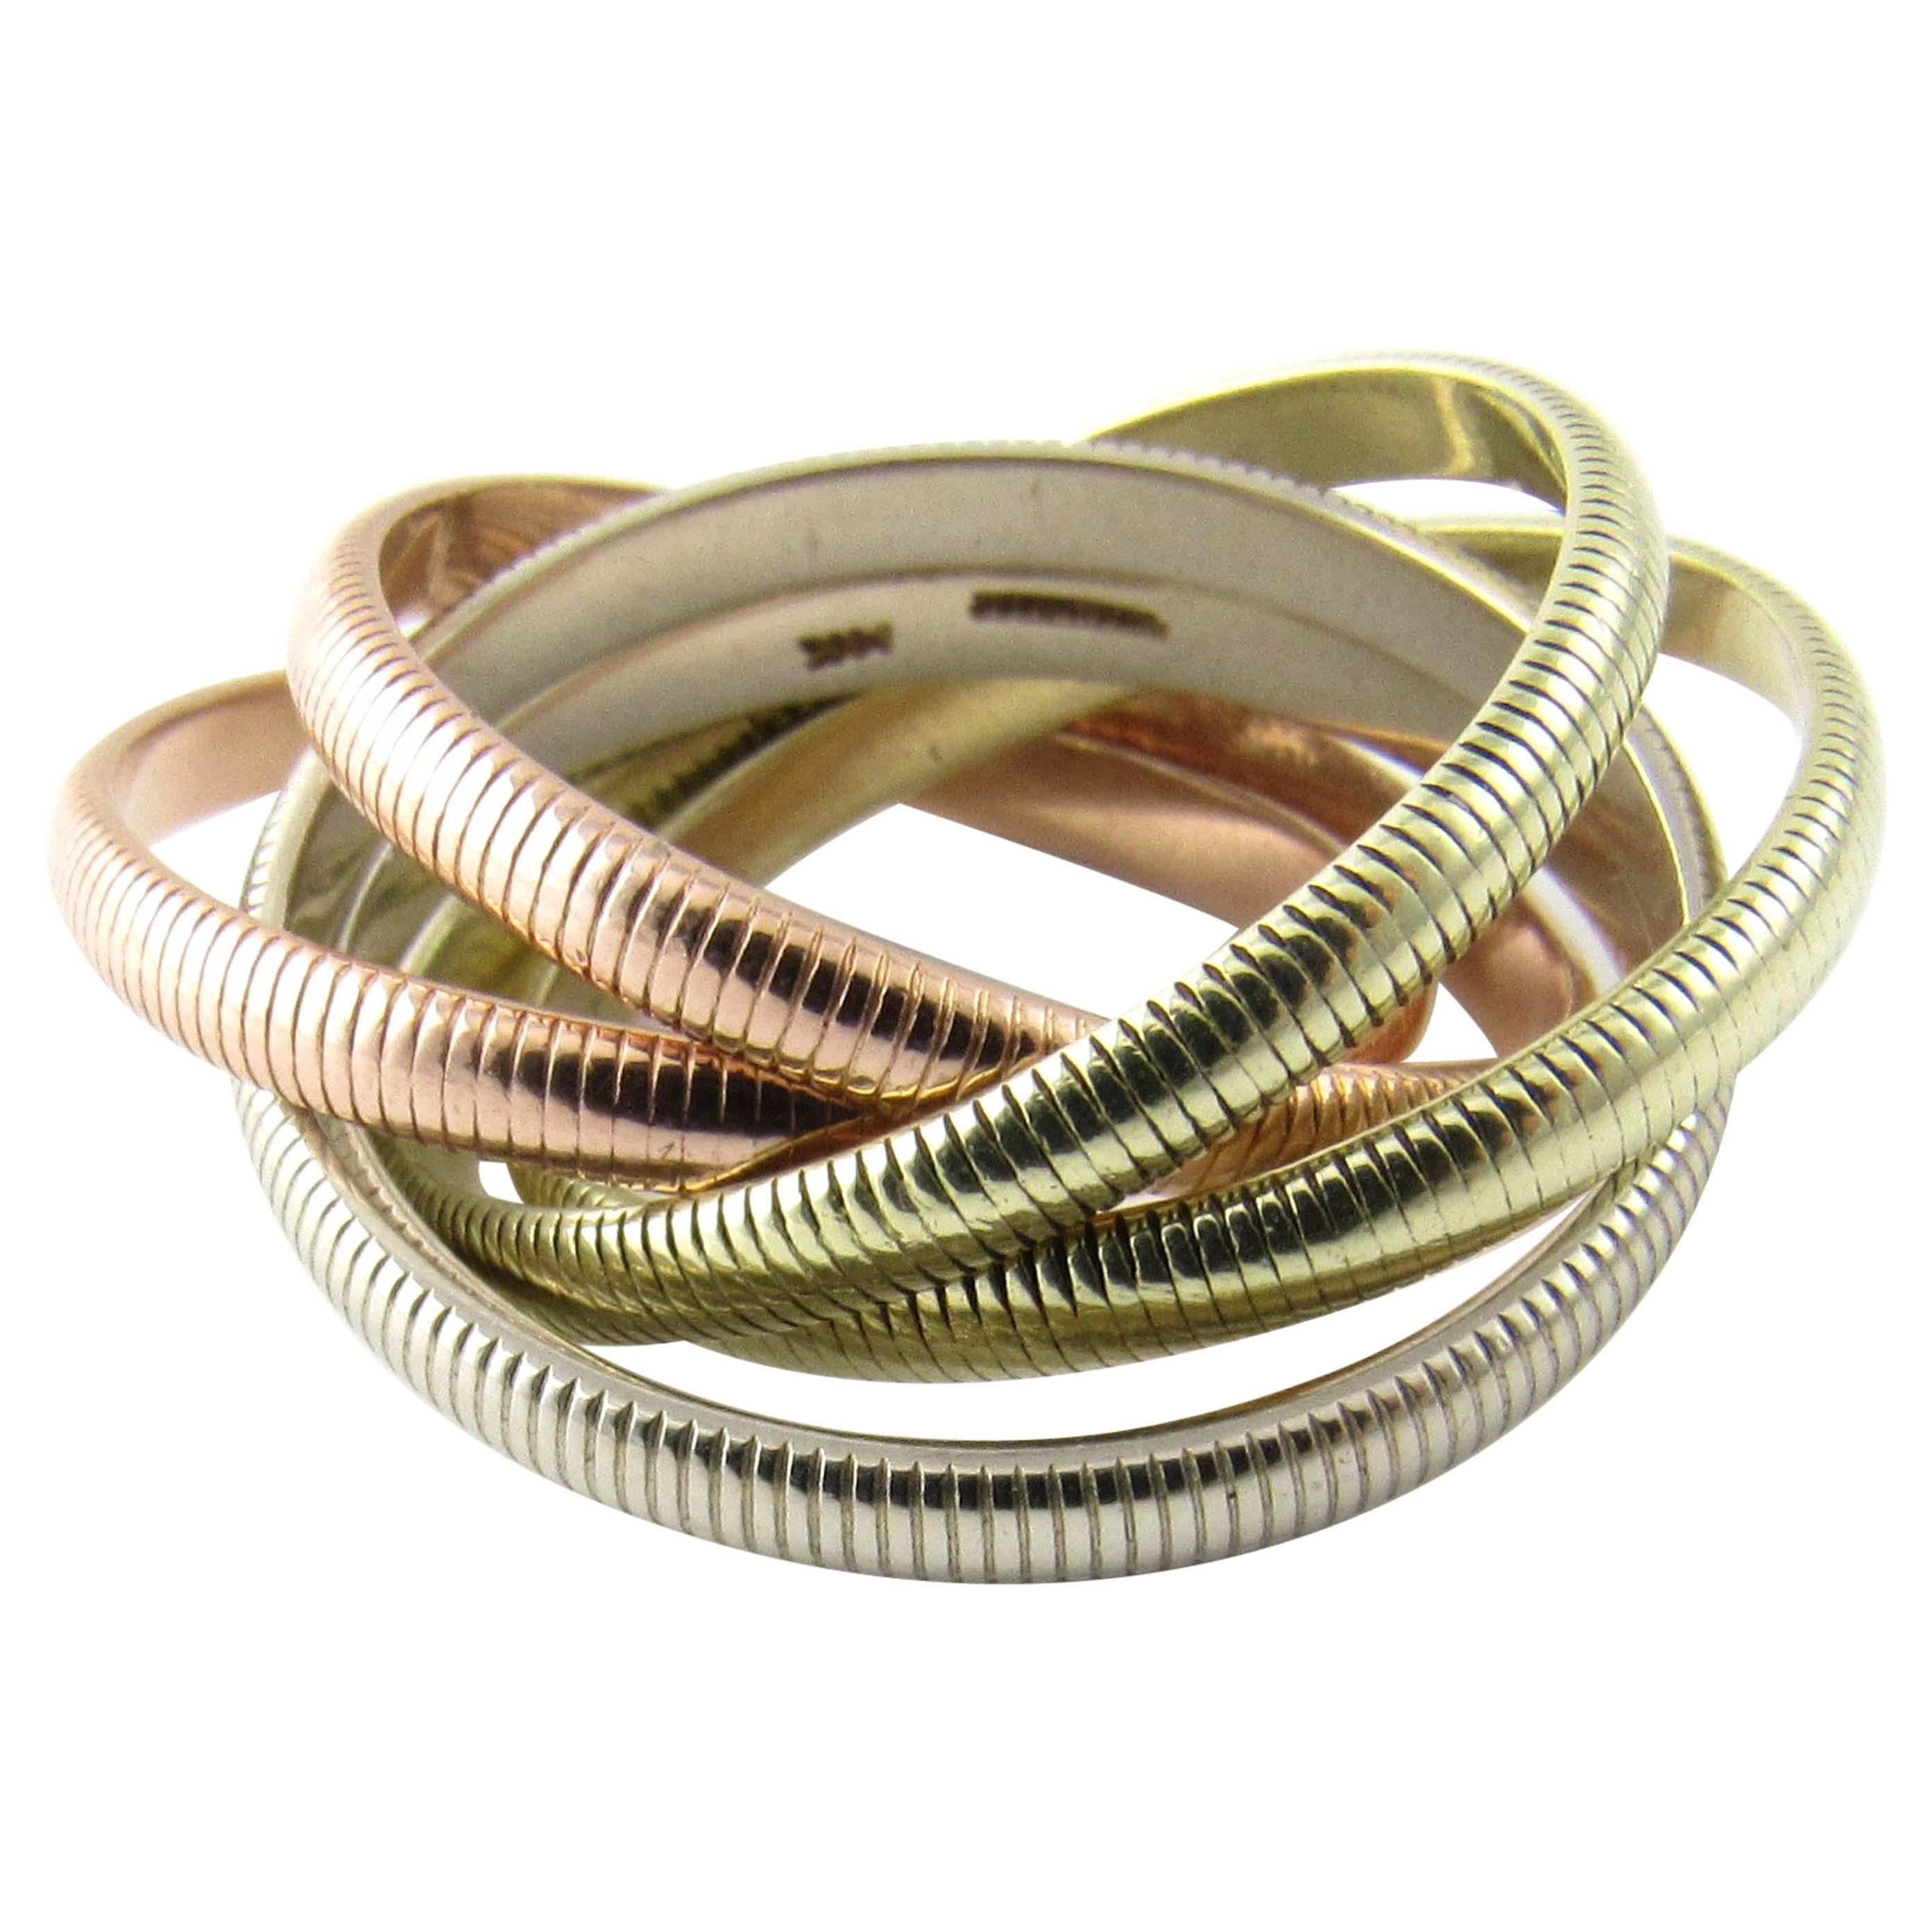 Tiffany & Co. 14 Karat Tri-Color Gold Ribbed Double Trinity Roller Ring